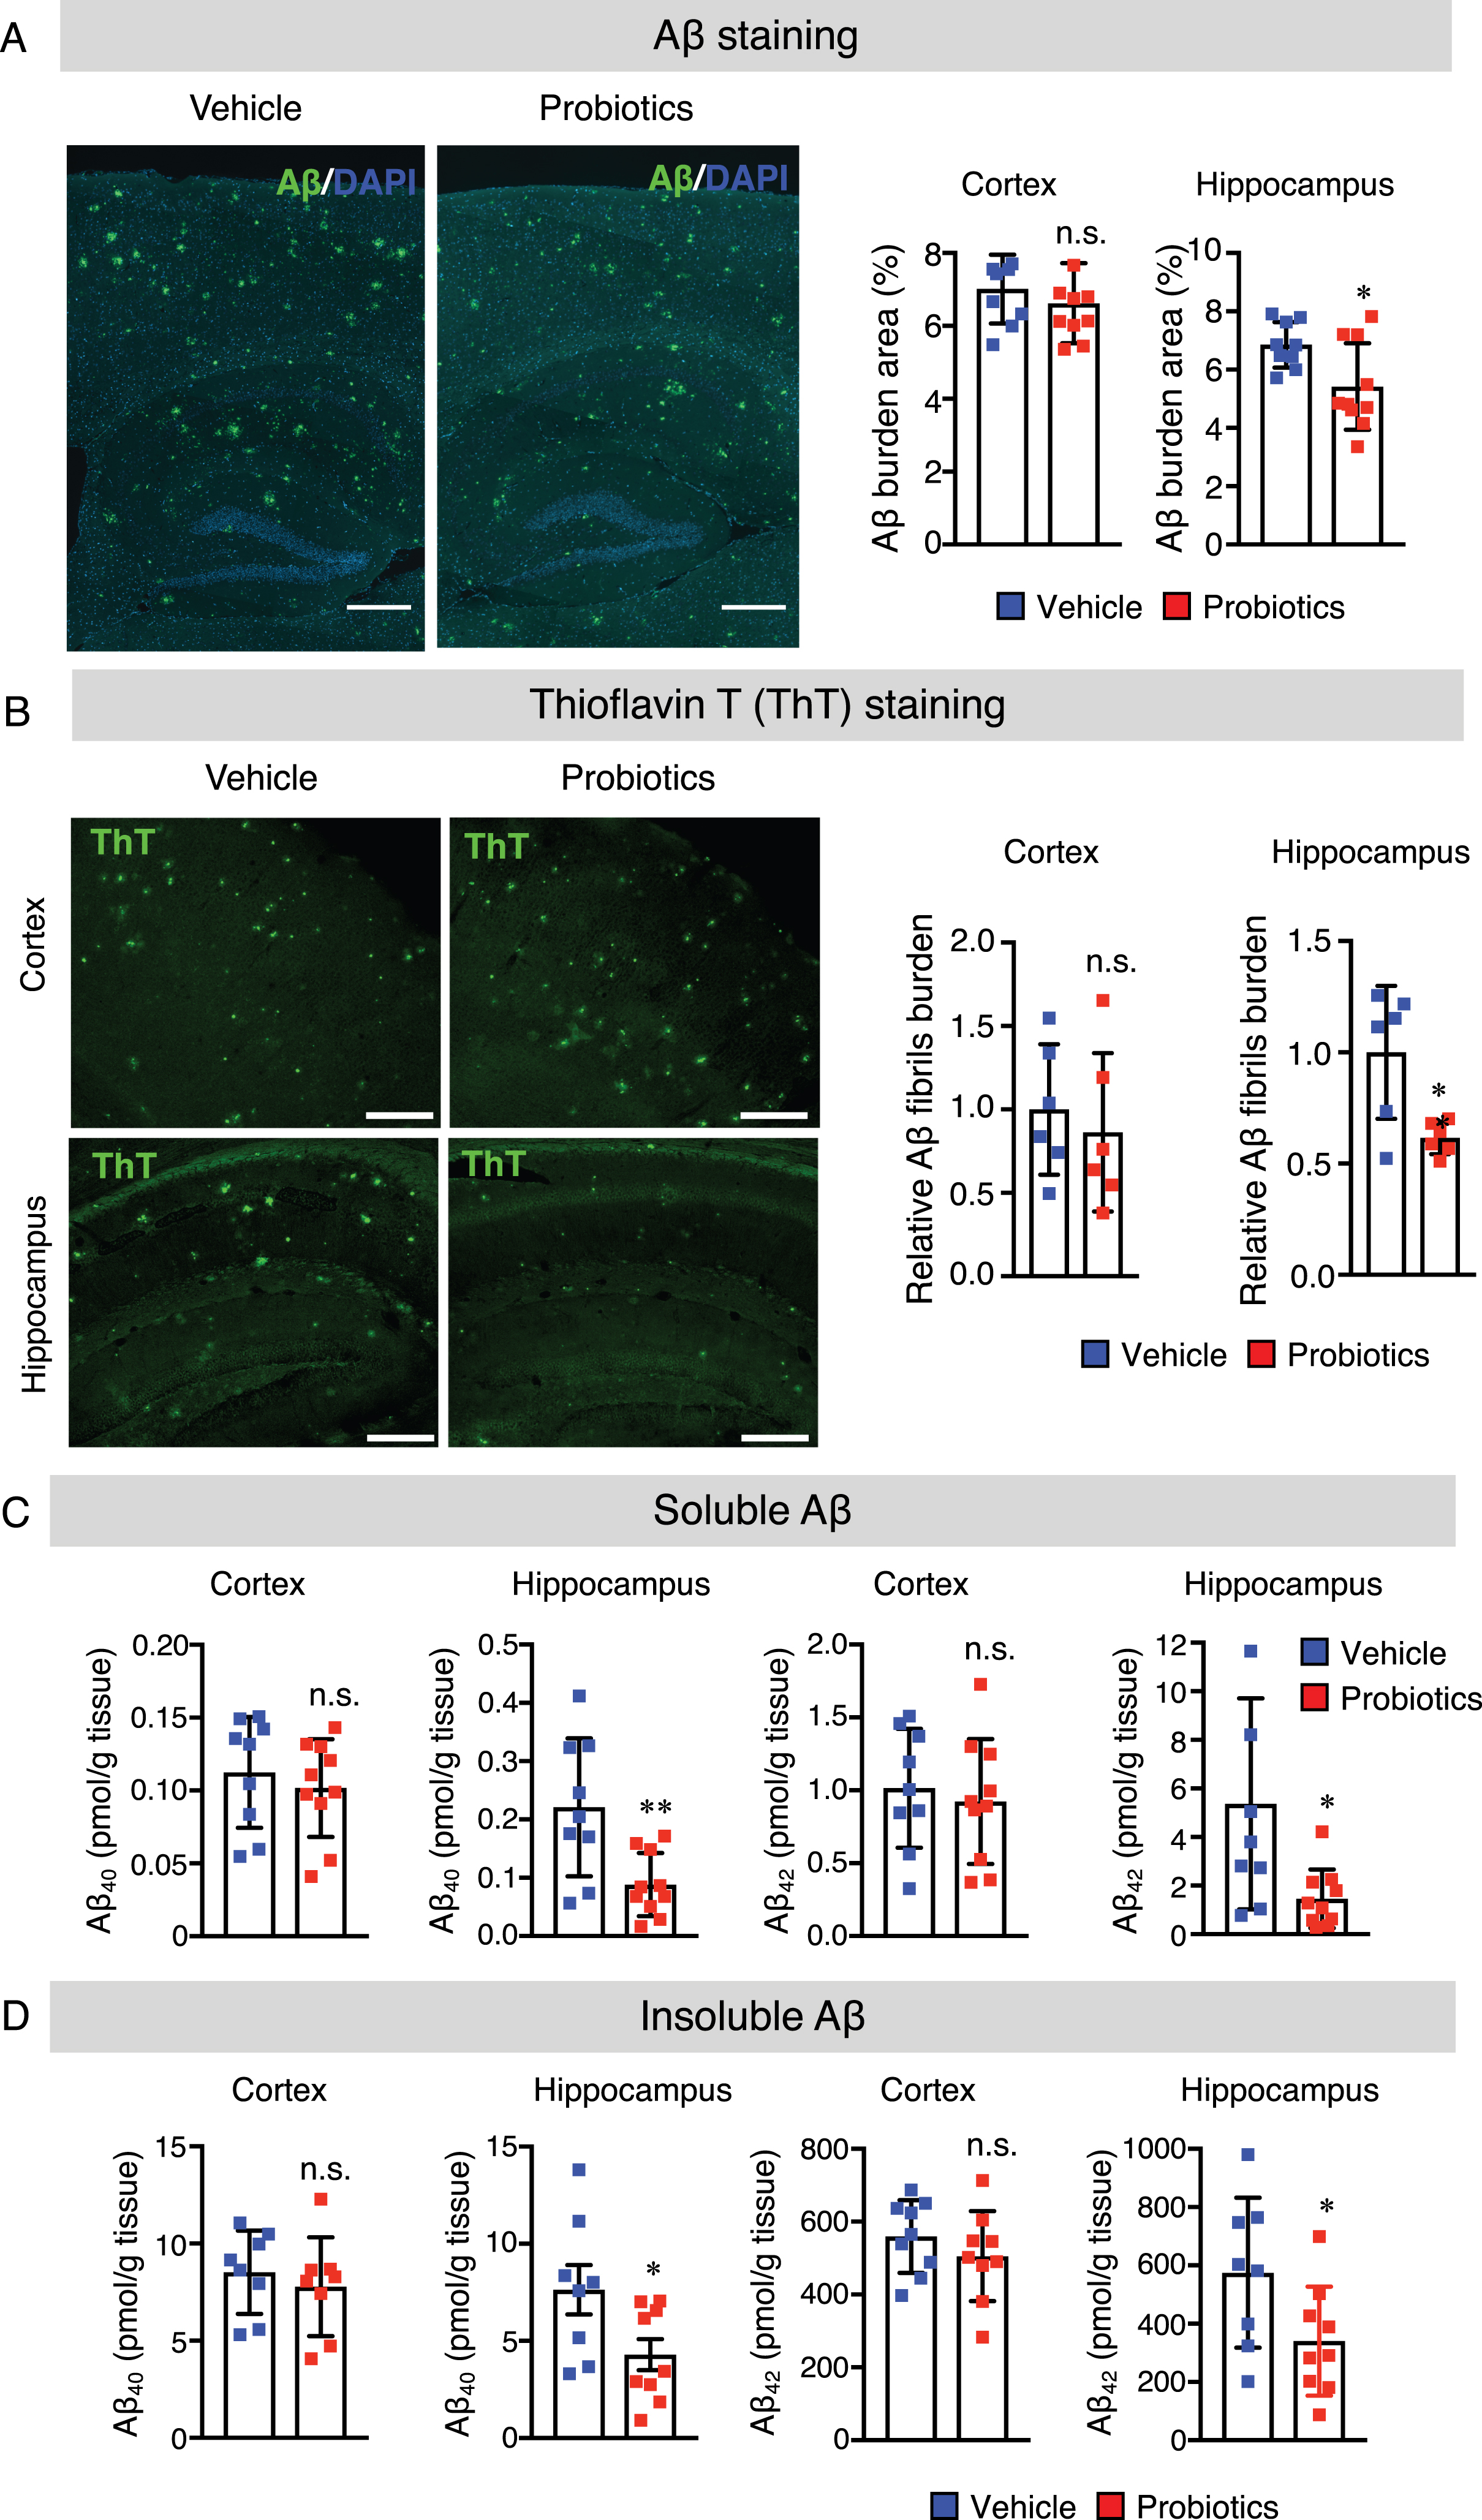 B. breve MCC1274 supplementation reduces Aβ plaque burden, Aβ levels, and Aβ fibrils in the hippocampus of AppNL-G-F mice. A) The representative fluorescent images of Aβ plaque burden detected by anti-Aβ antibody (82E1), which recognizes both Aβ40 and Aβ42 (left panel). Aβ burden areas including the cortex and hippocampus were quantified as the percentage of immunostained area divided by all cortical and hippocampal areas (right panel). Scale bars are 250μm. B) The representative fluorescent images of Aβ fibril were detected by thioflavin T (left panel). Relative Aβ fibril burden in both cortex and hippocampus were quantified (right panel), Scale bars are 100μm. Sandwich ELISA result of cortical and hippocampal levels of soluble Aβ40 and Aβ42 (C) and insoluble Aβ40 and Aβ42 (D) of AppNL-G-F mice. Aβ levels were normalized to each tissue weight. Data are expressed as the mean±SD, n = 9-10, *p < 0.05, **p < 0.01 compared with the vehicle group, as determined by Student’s t-test.